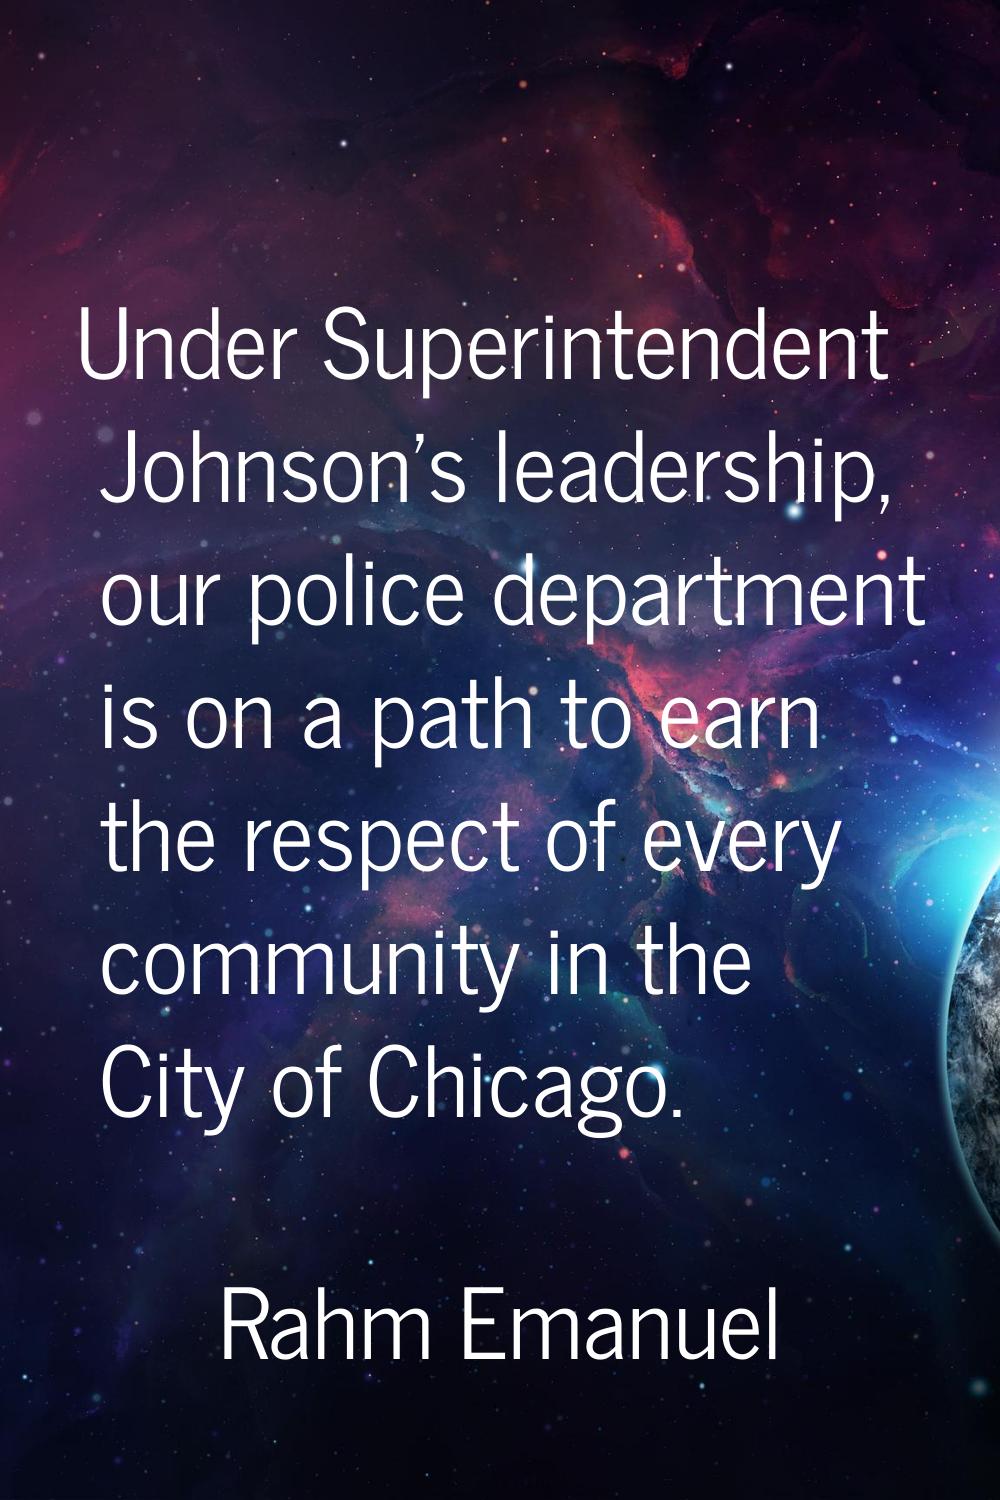 Under Superintendent Johnson's leadership, our police department is on a path to earn the respect o